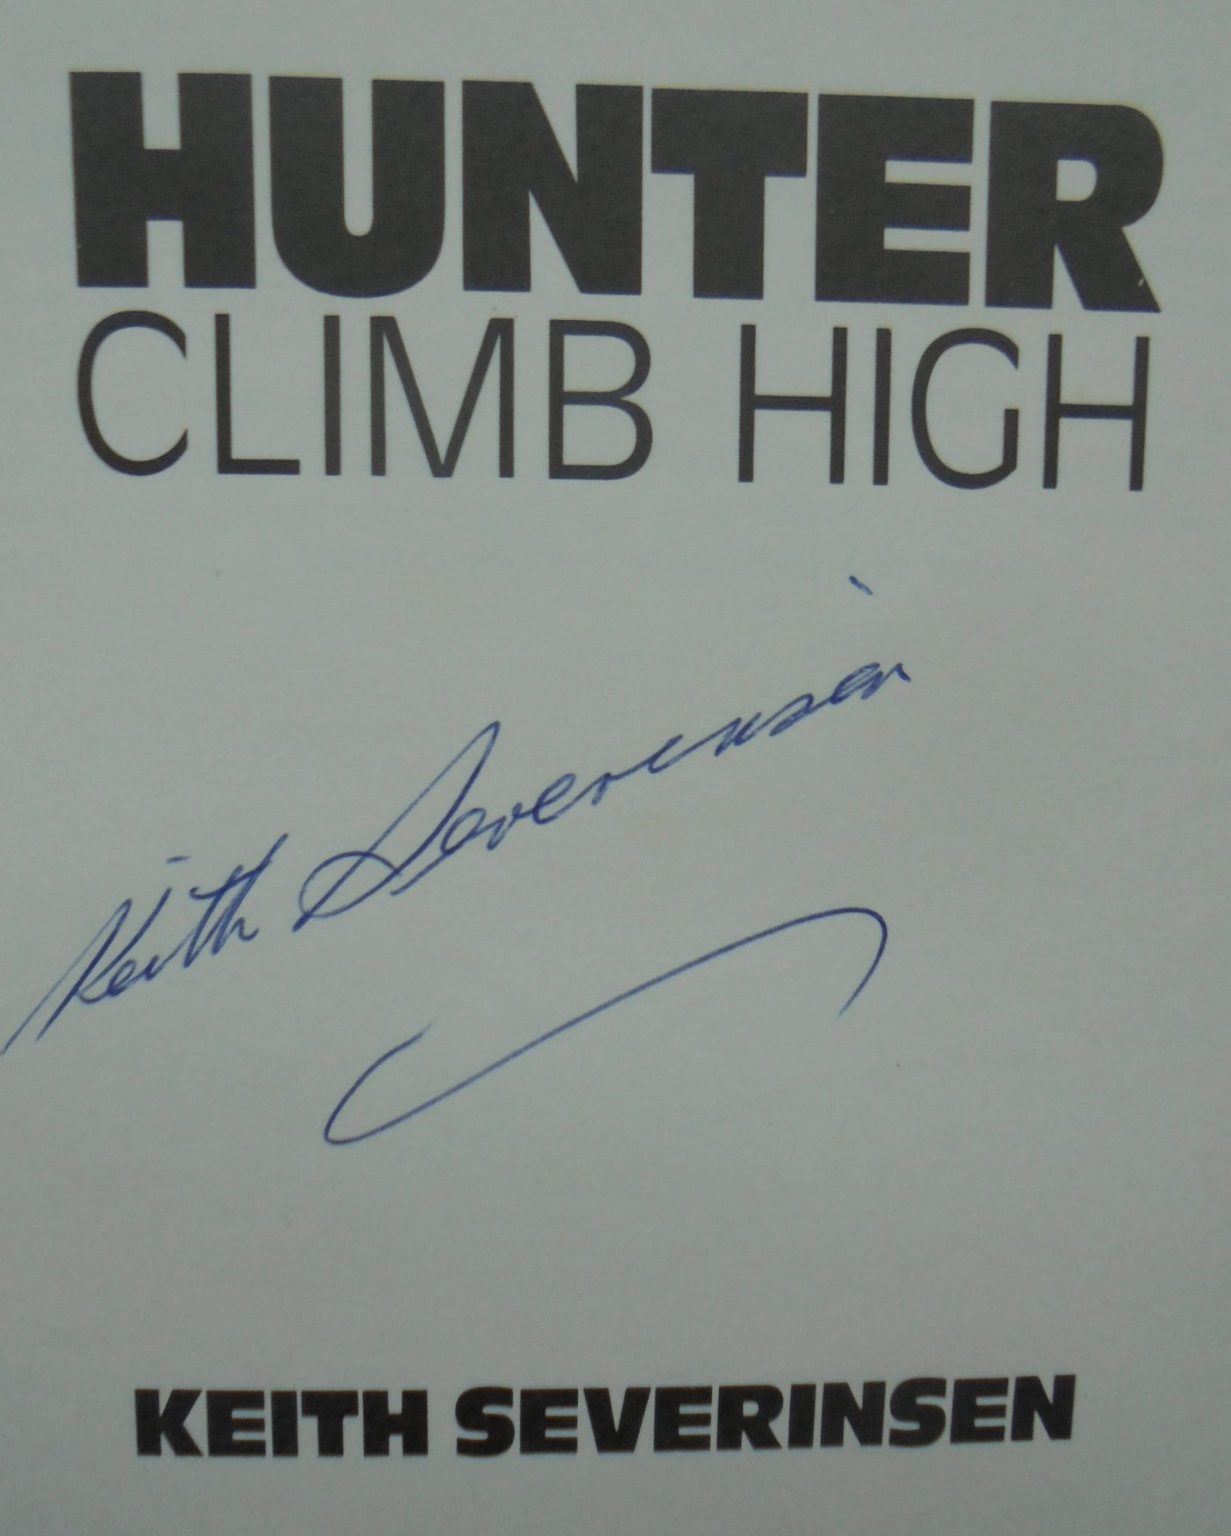 Hunter Climb High by Keith Severinsen. SIGNED BY AUTHOR.